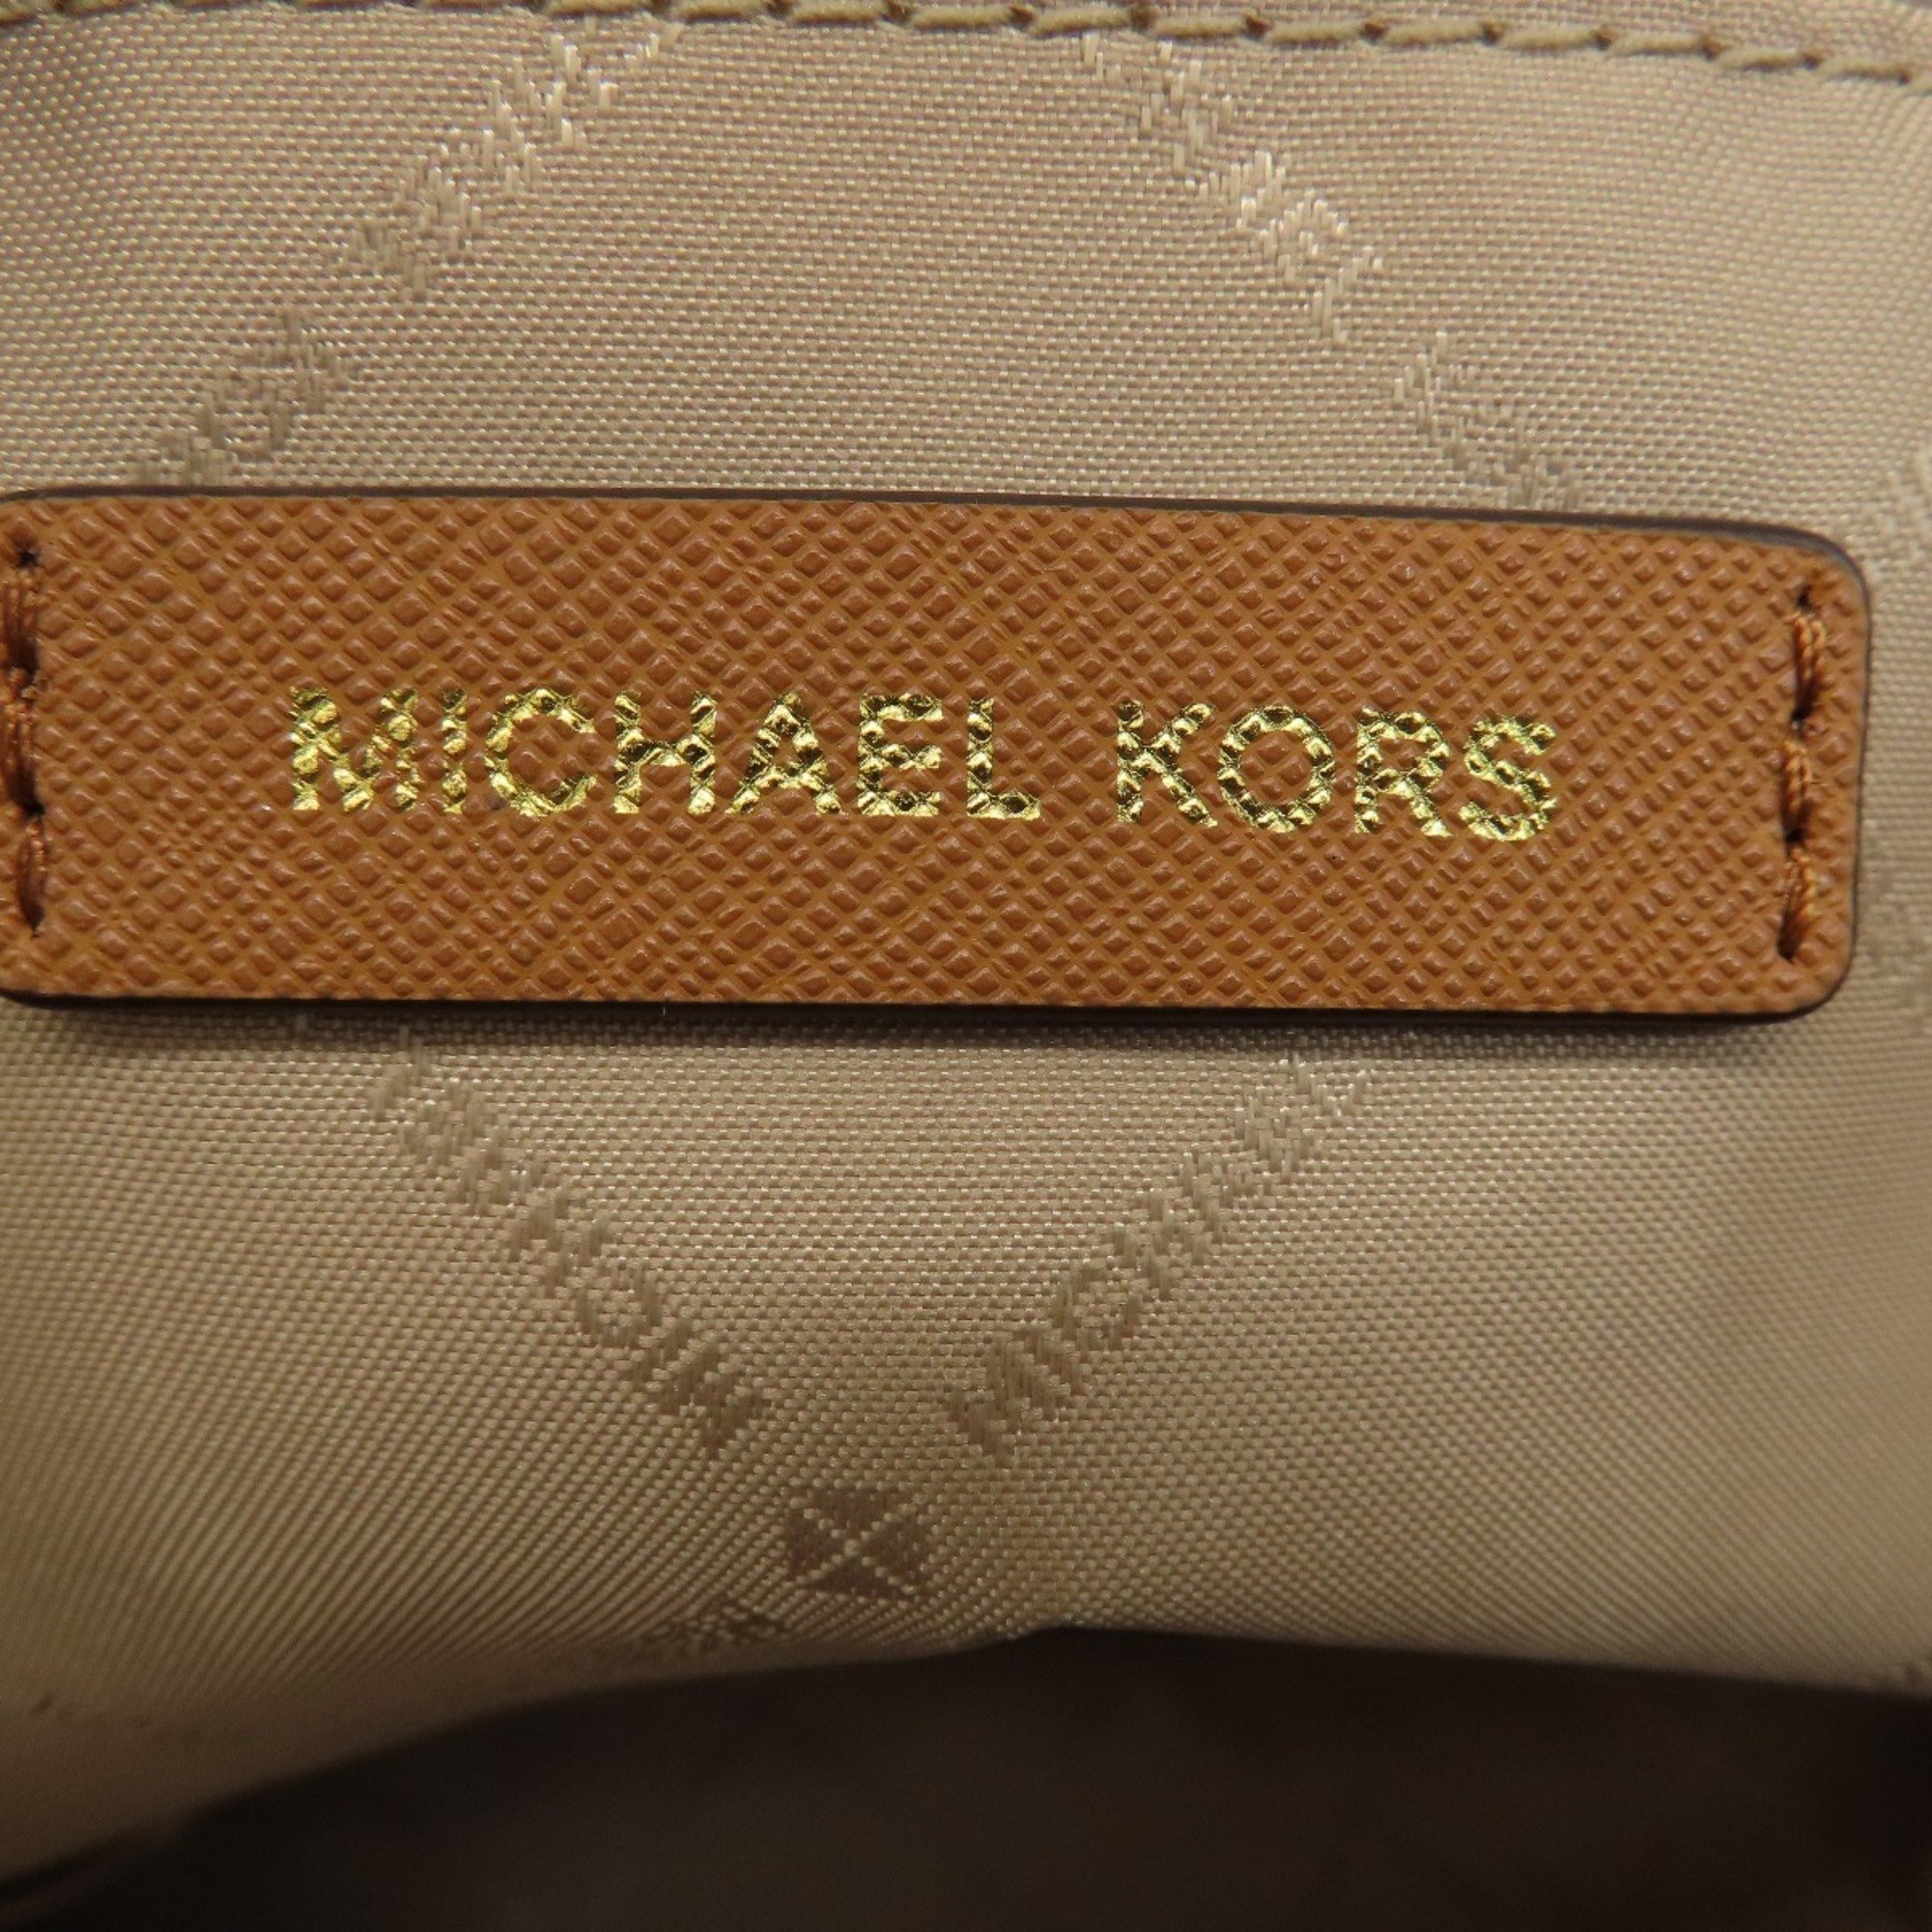 Michael Kors MK Signature Tote Bag Leather Coated Canvas Women's